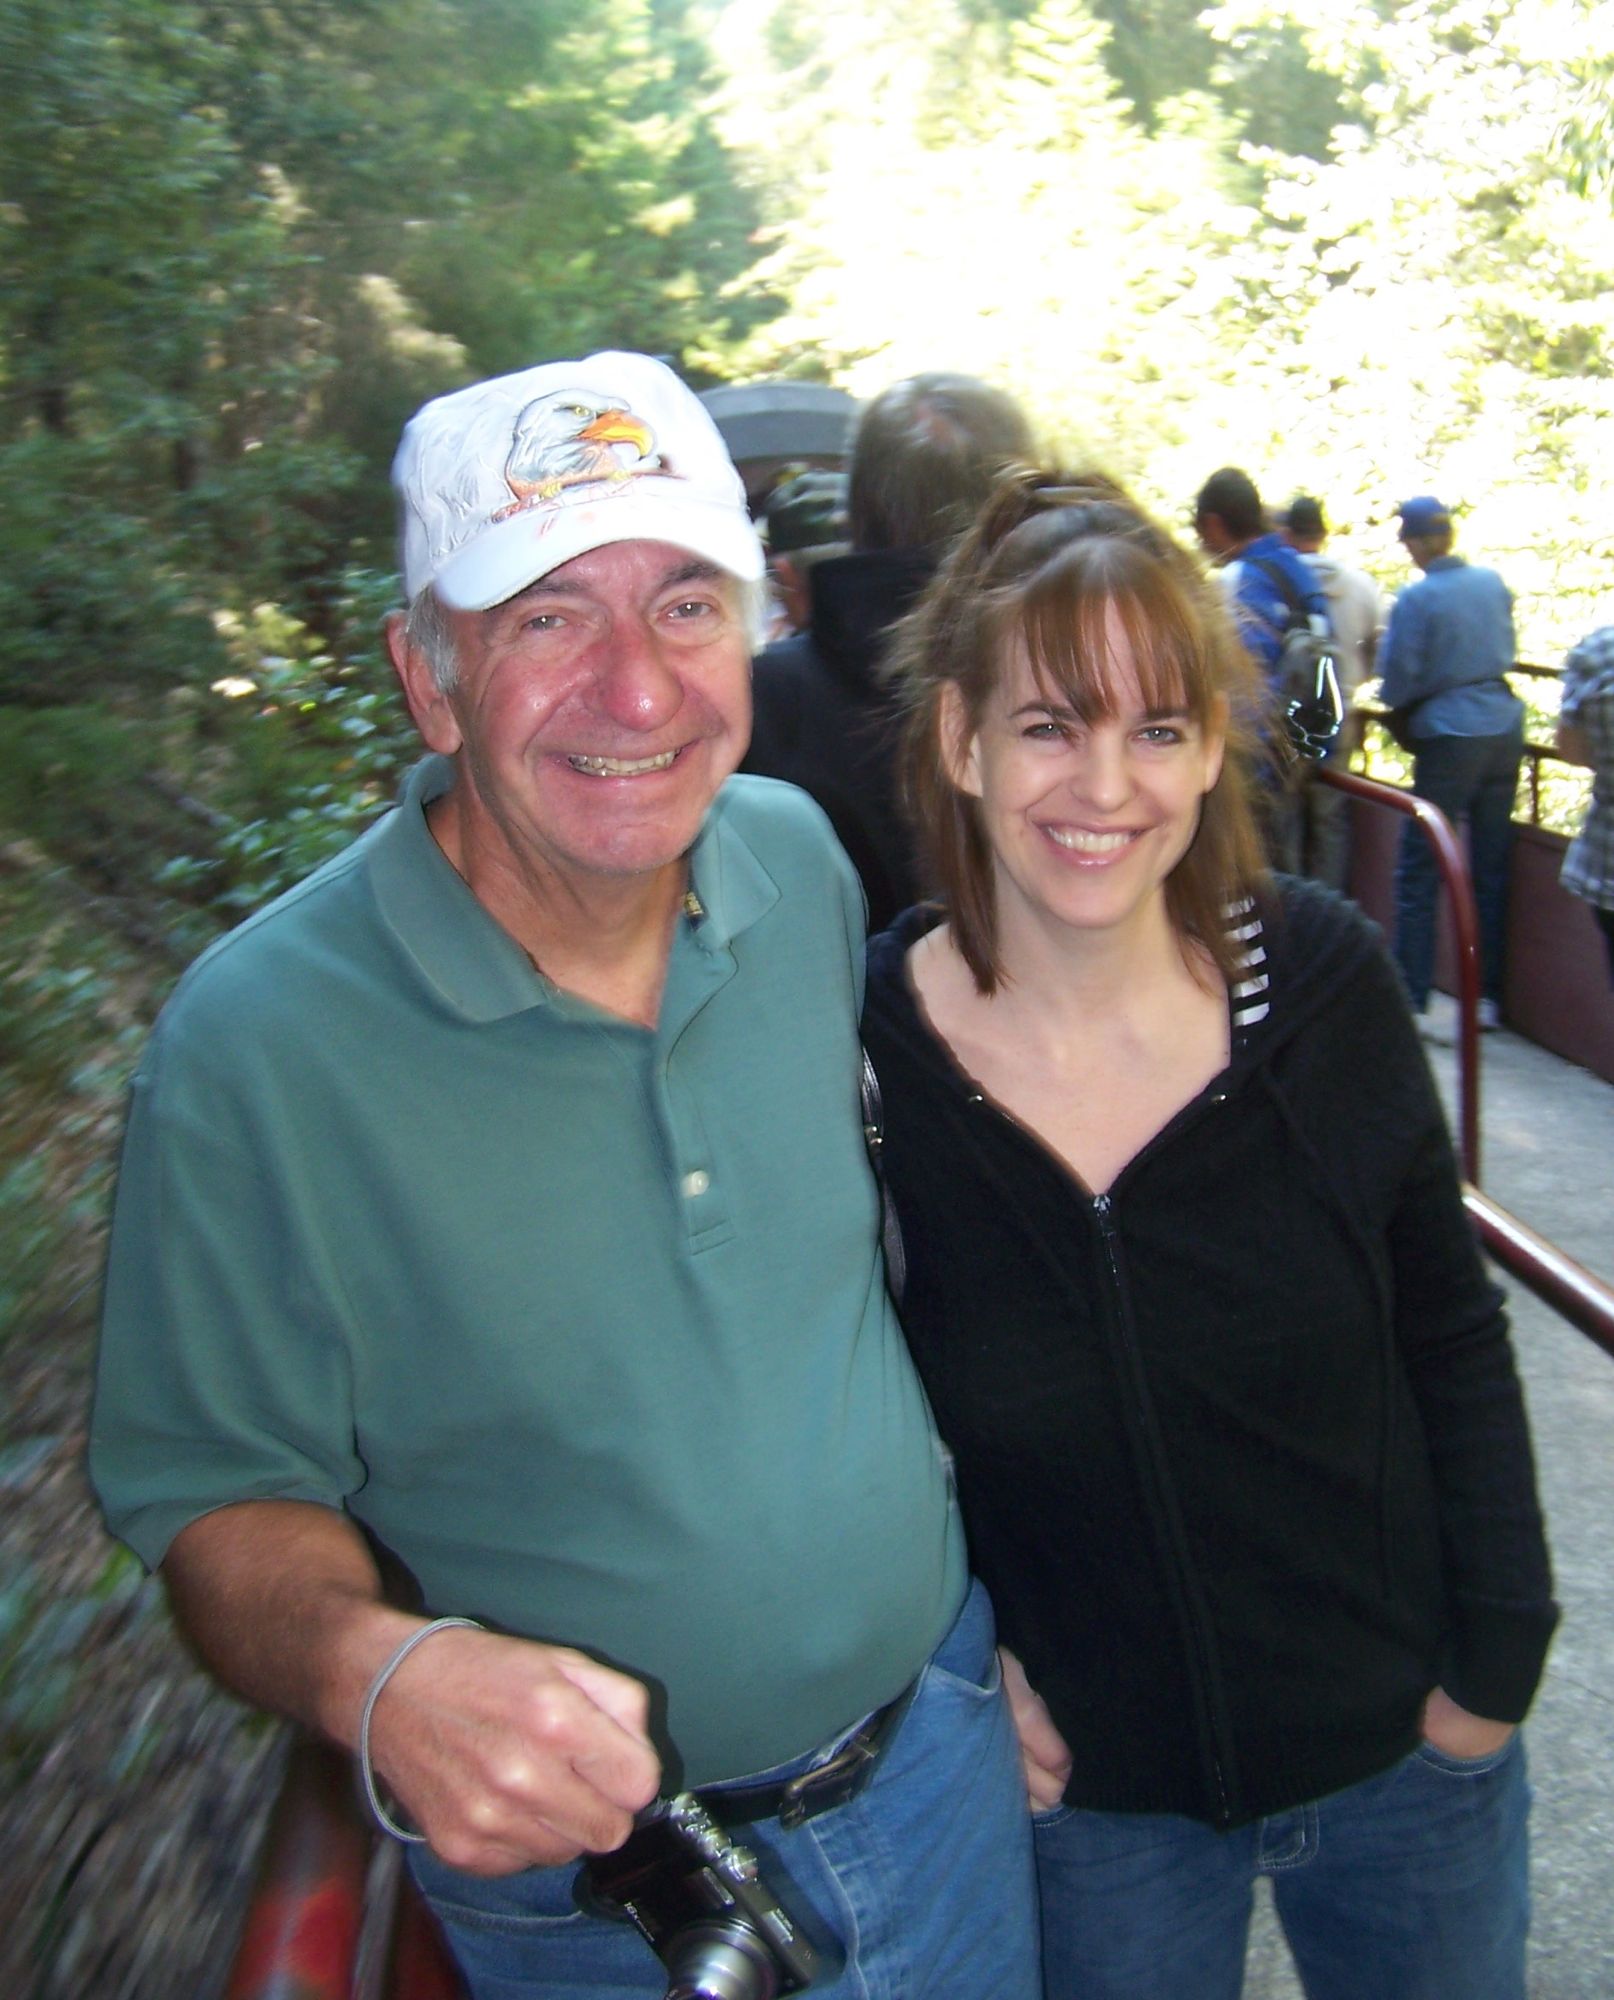 All aboard, the Mendocino skunk train Aug 22, 2014. Dad and Janine.